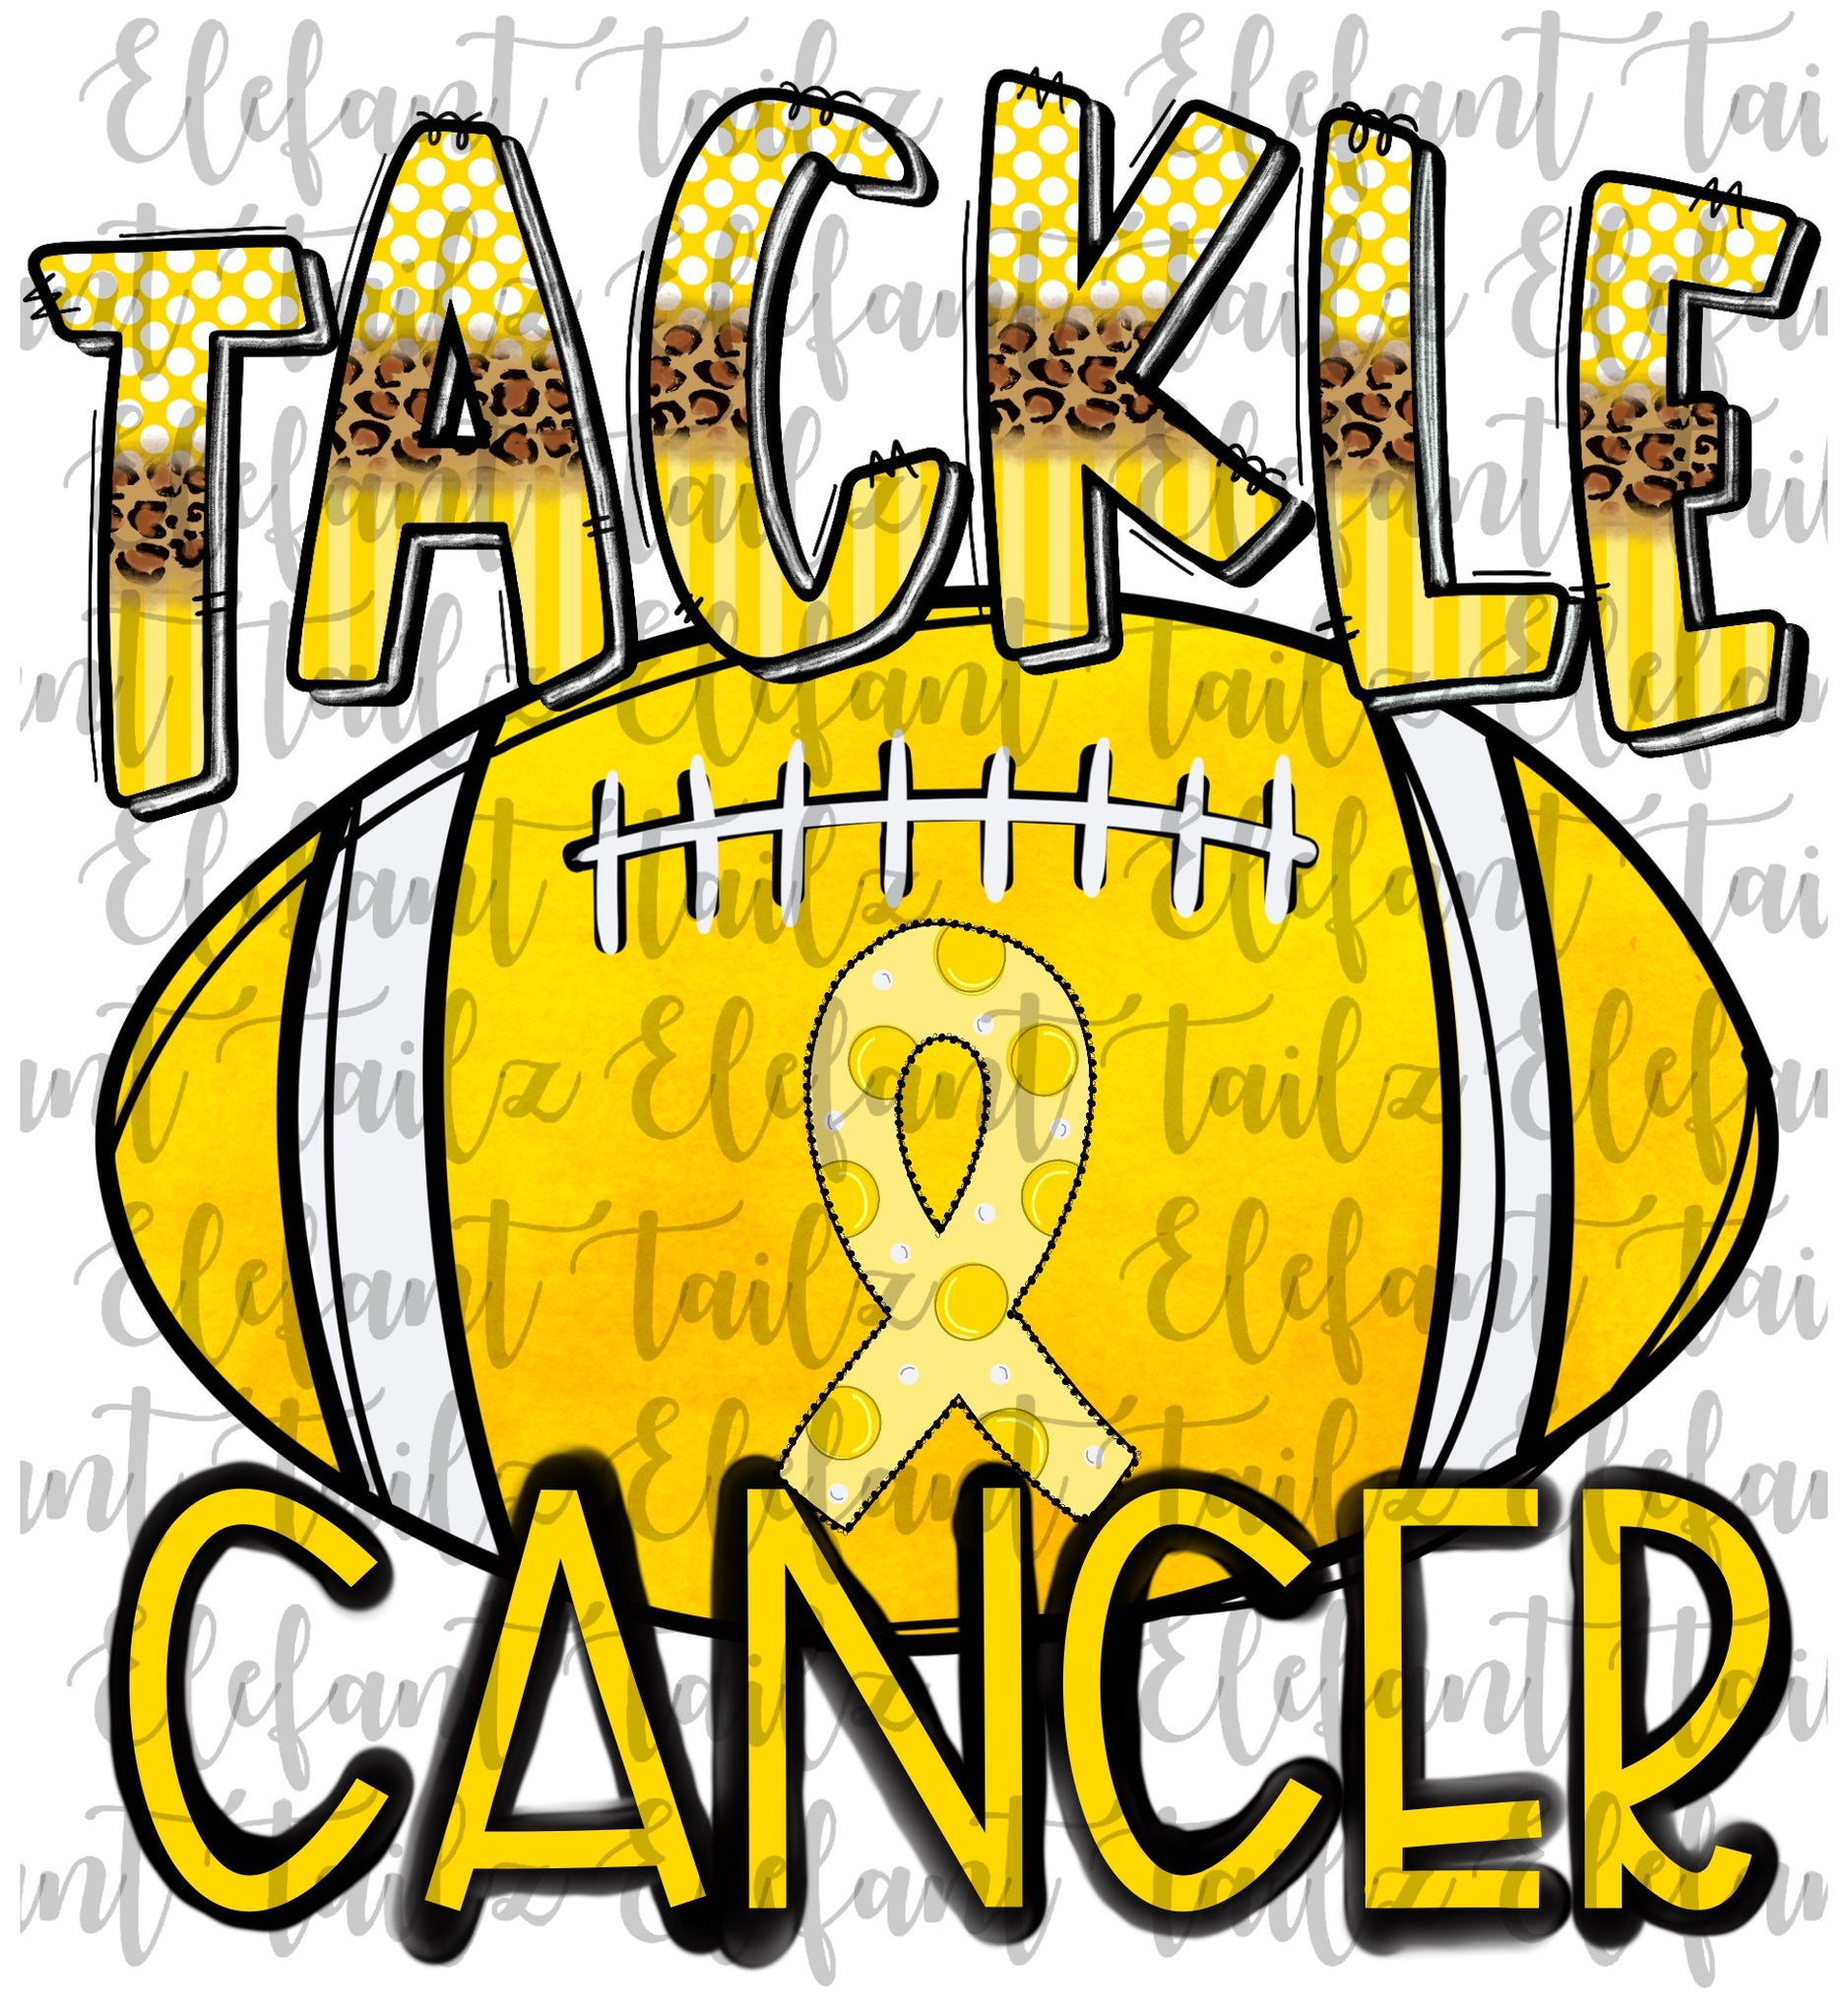 Tackle Cancer Yellow - Football